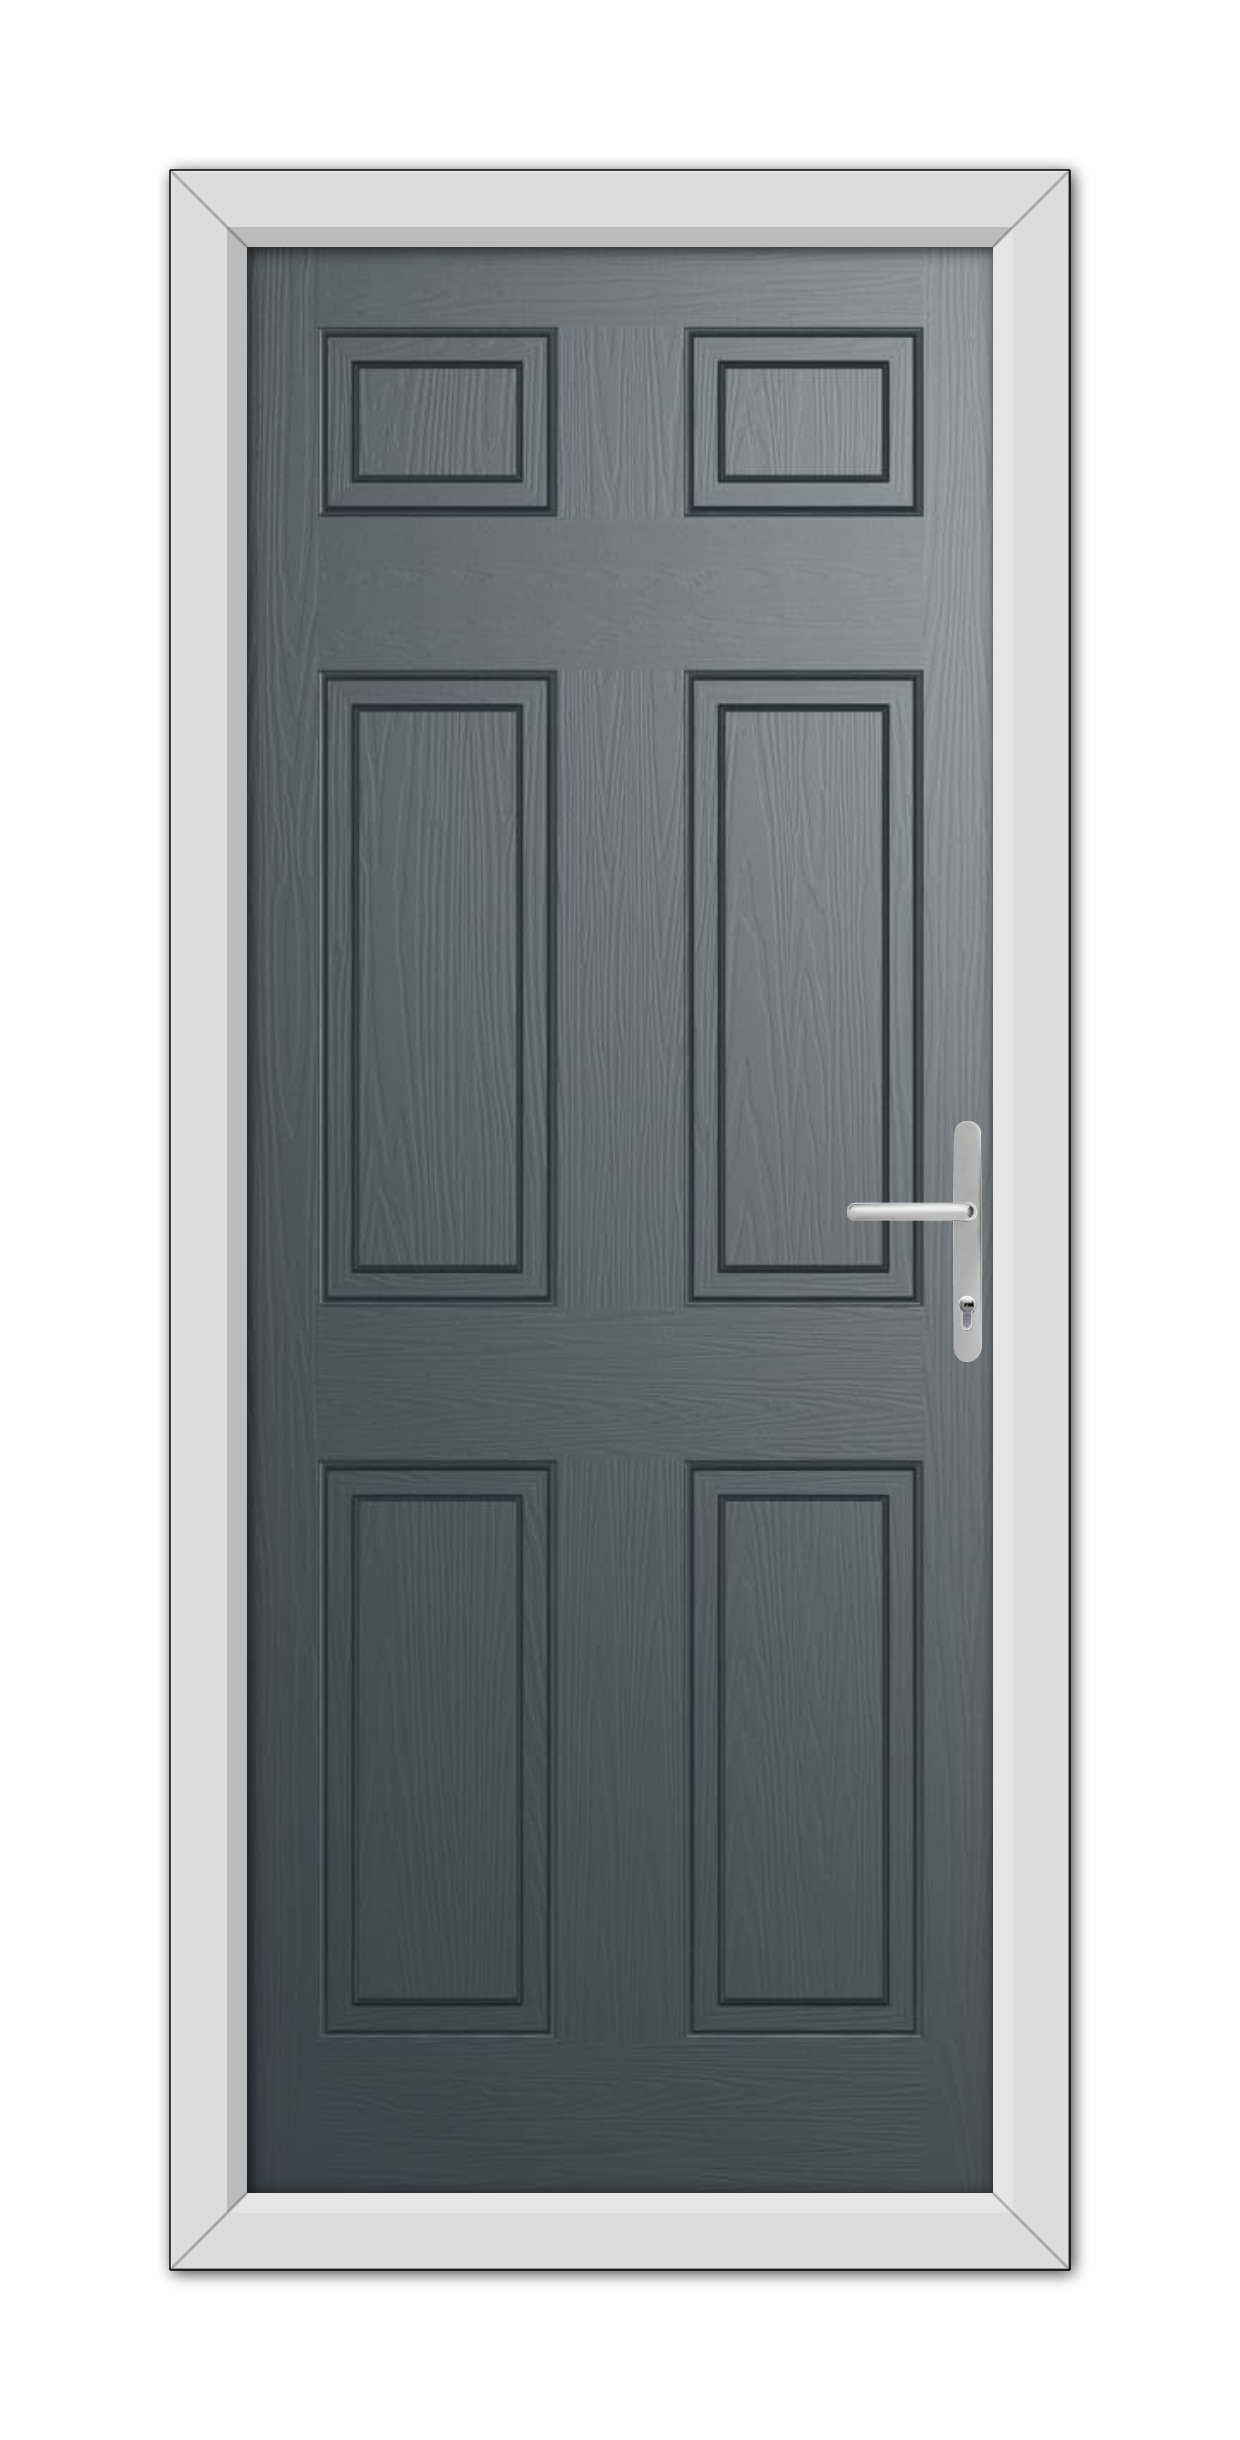 A modern Anthracite Grey Middleton Solid Composite door with six panels and a silver handle, set within a white frame.